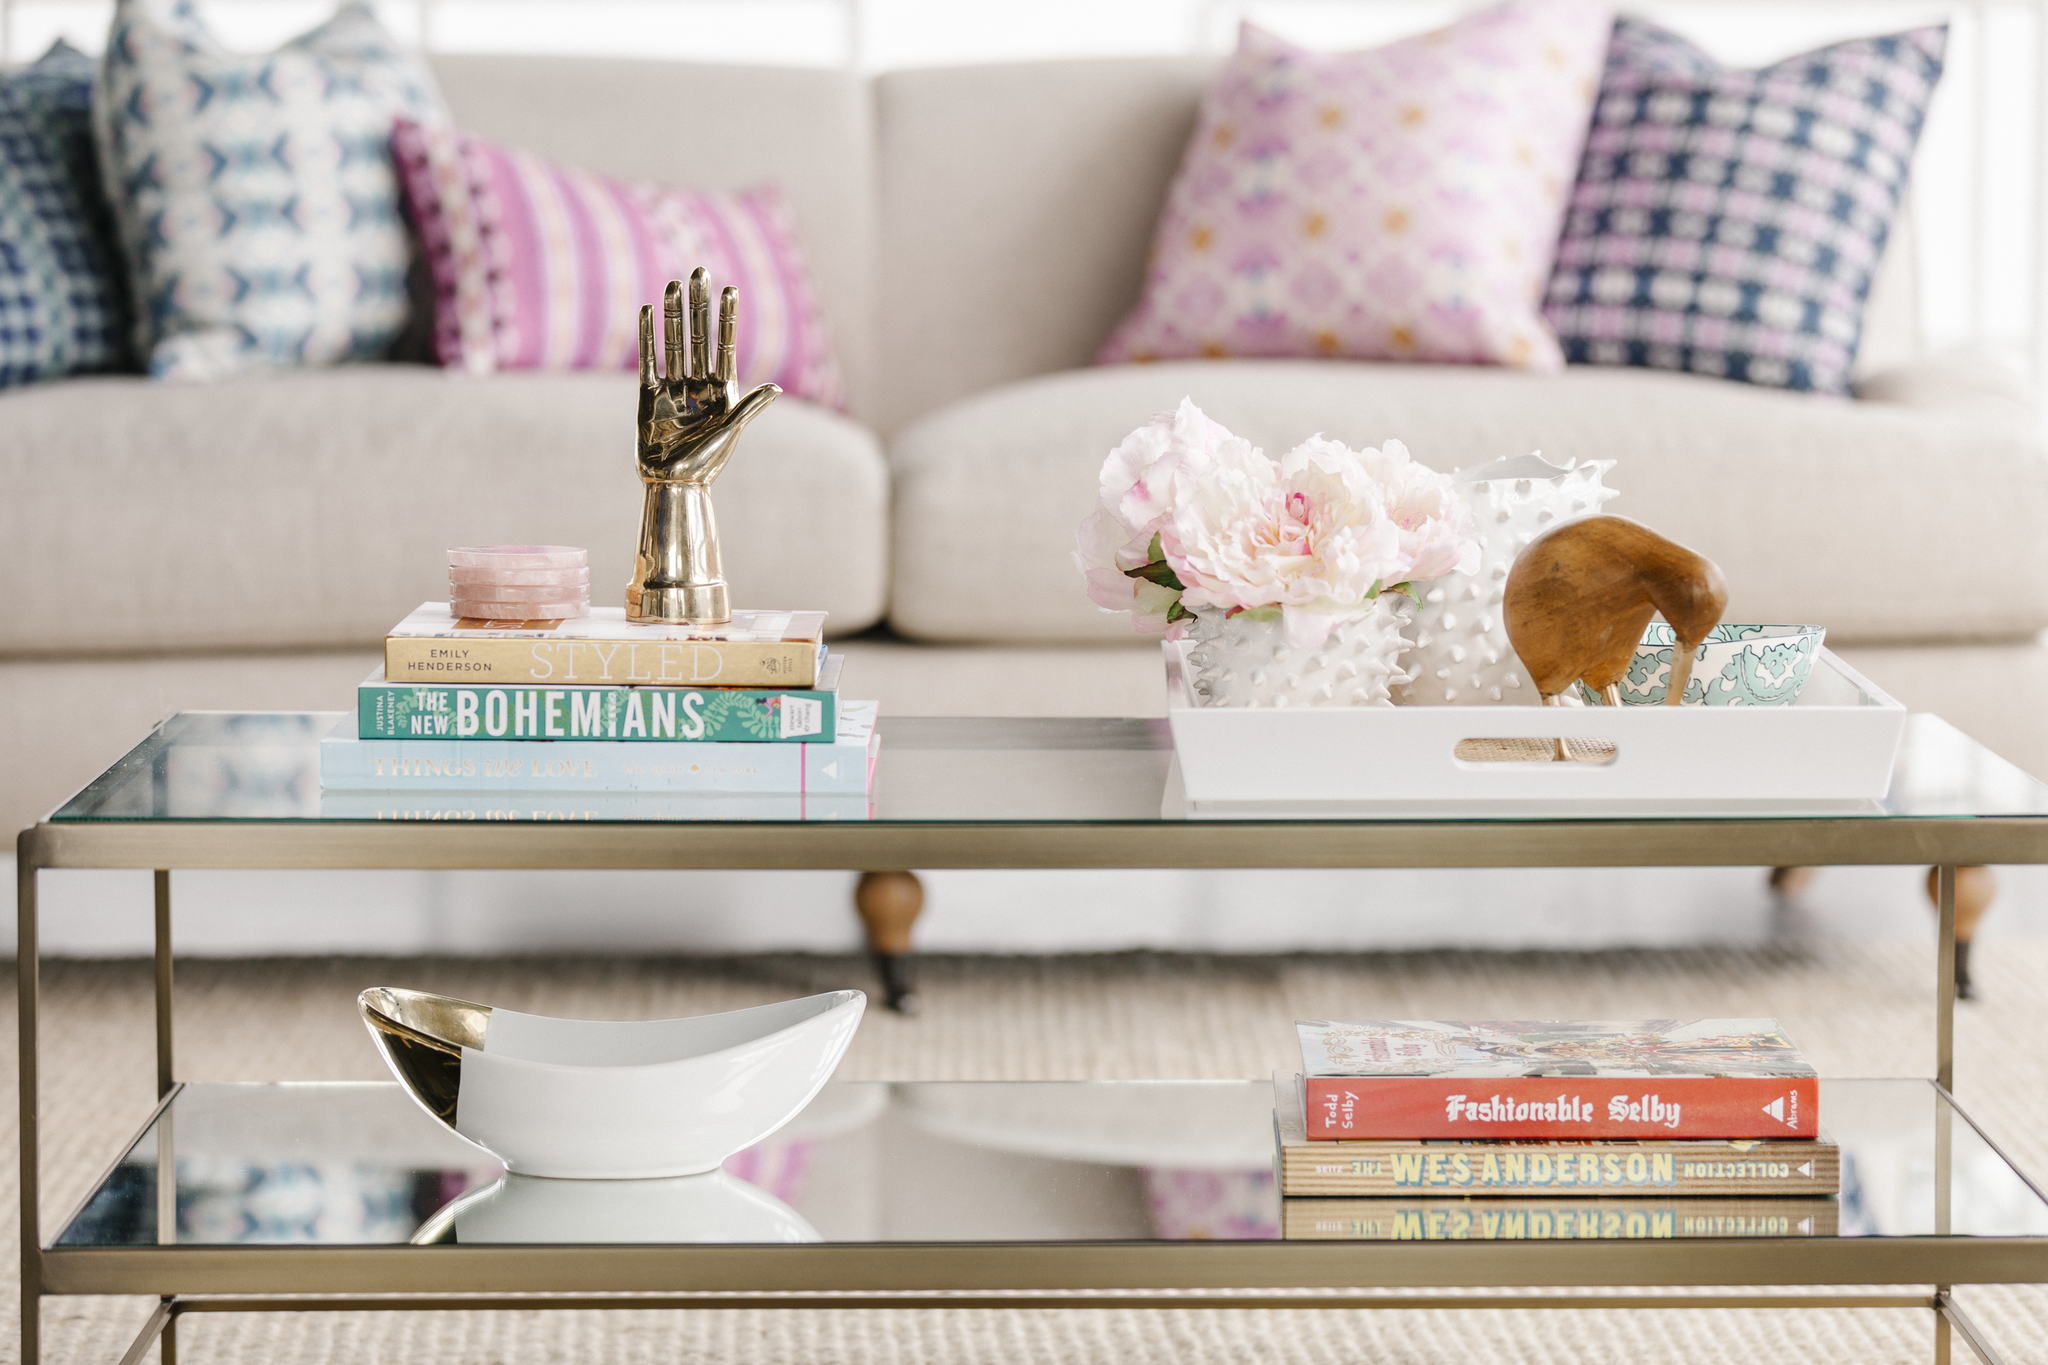 Places to Buy: | Interior Designers Share Their Game-Changing Shopping | POPSUGAR Home Photo 8